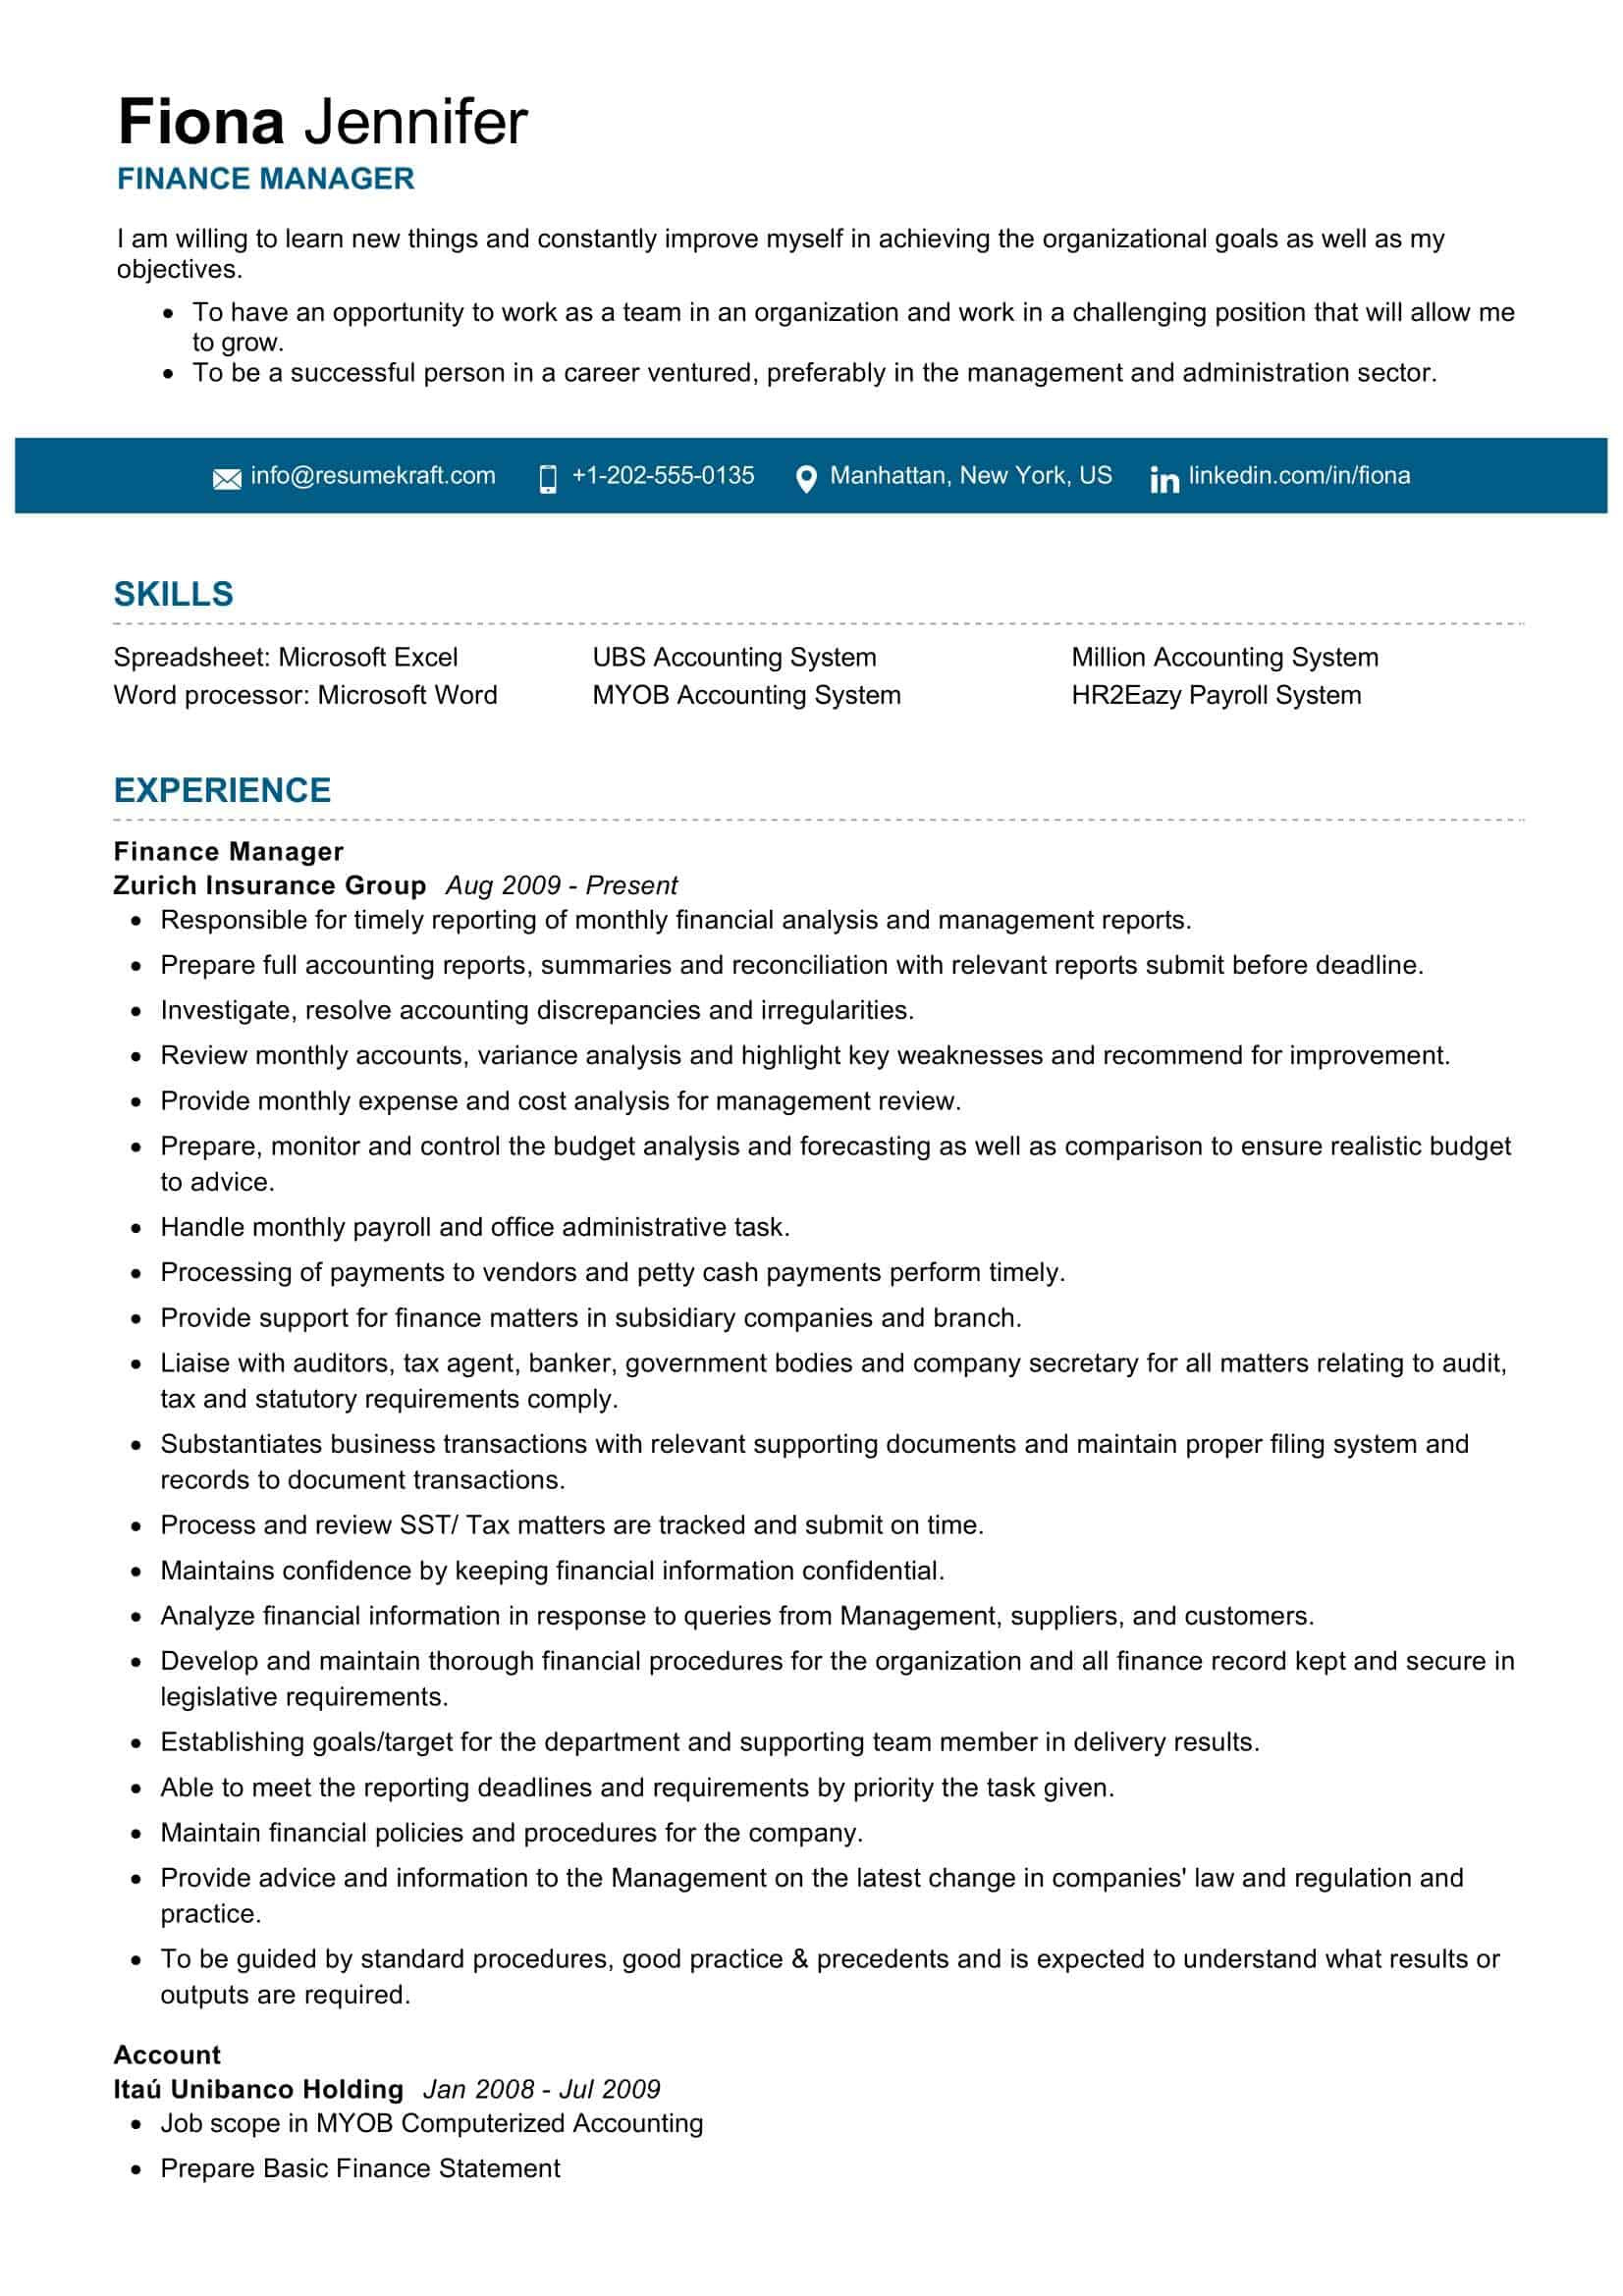 Professional Accounting and Finance Resumes Samples Finance Manager Resume Sample 2022 Writing Tips – Resumekraft